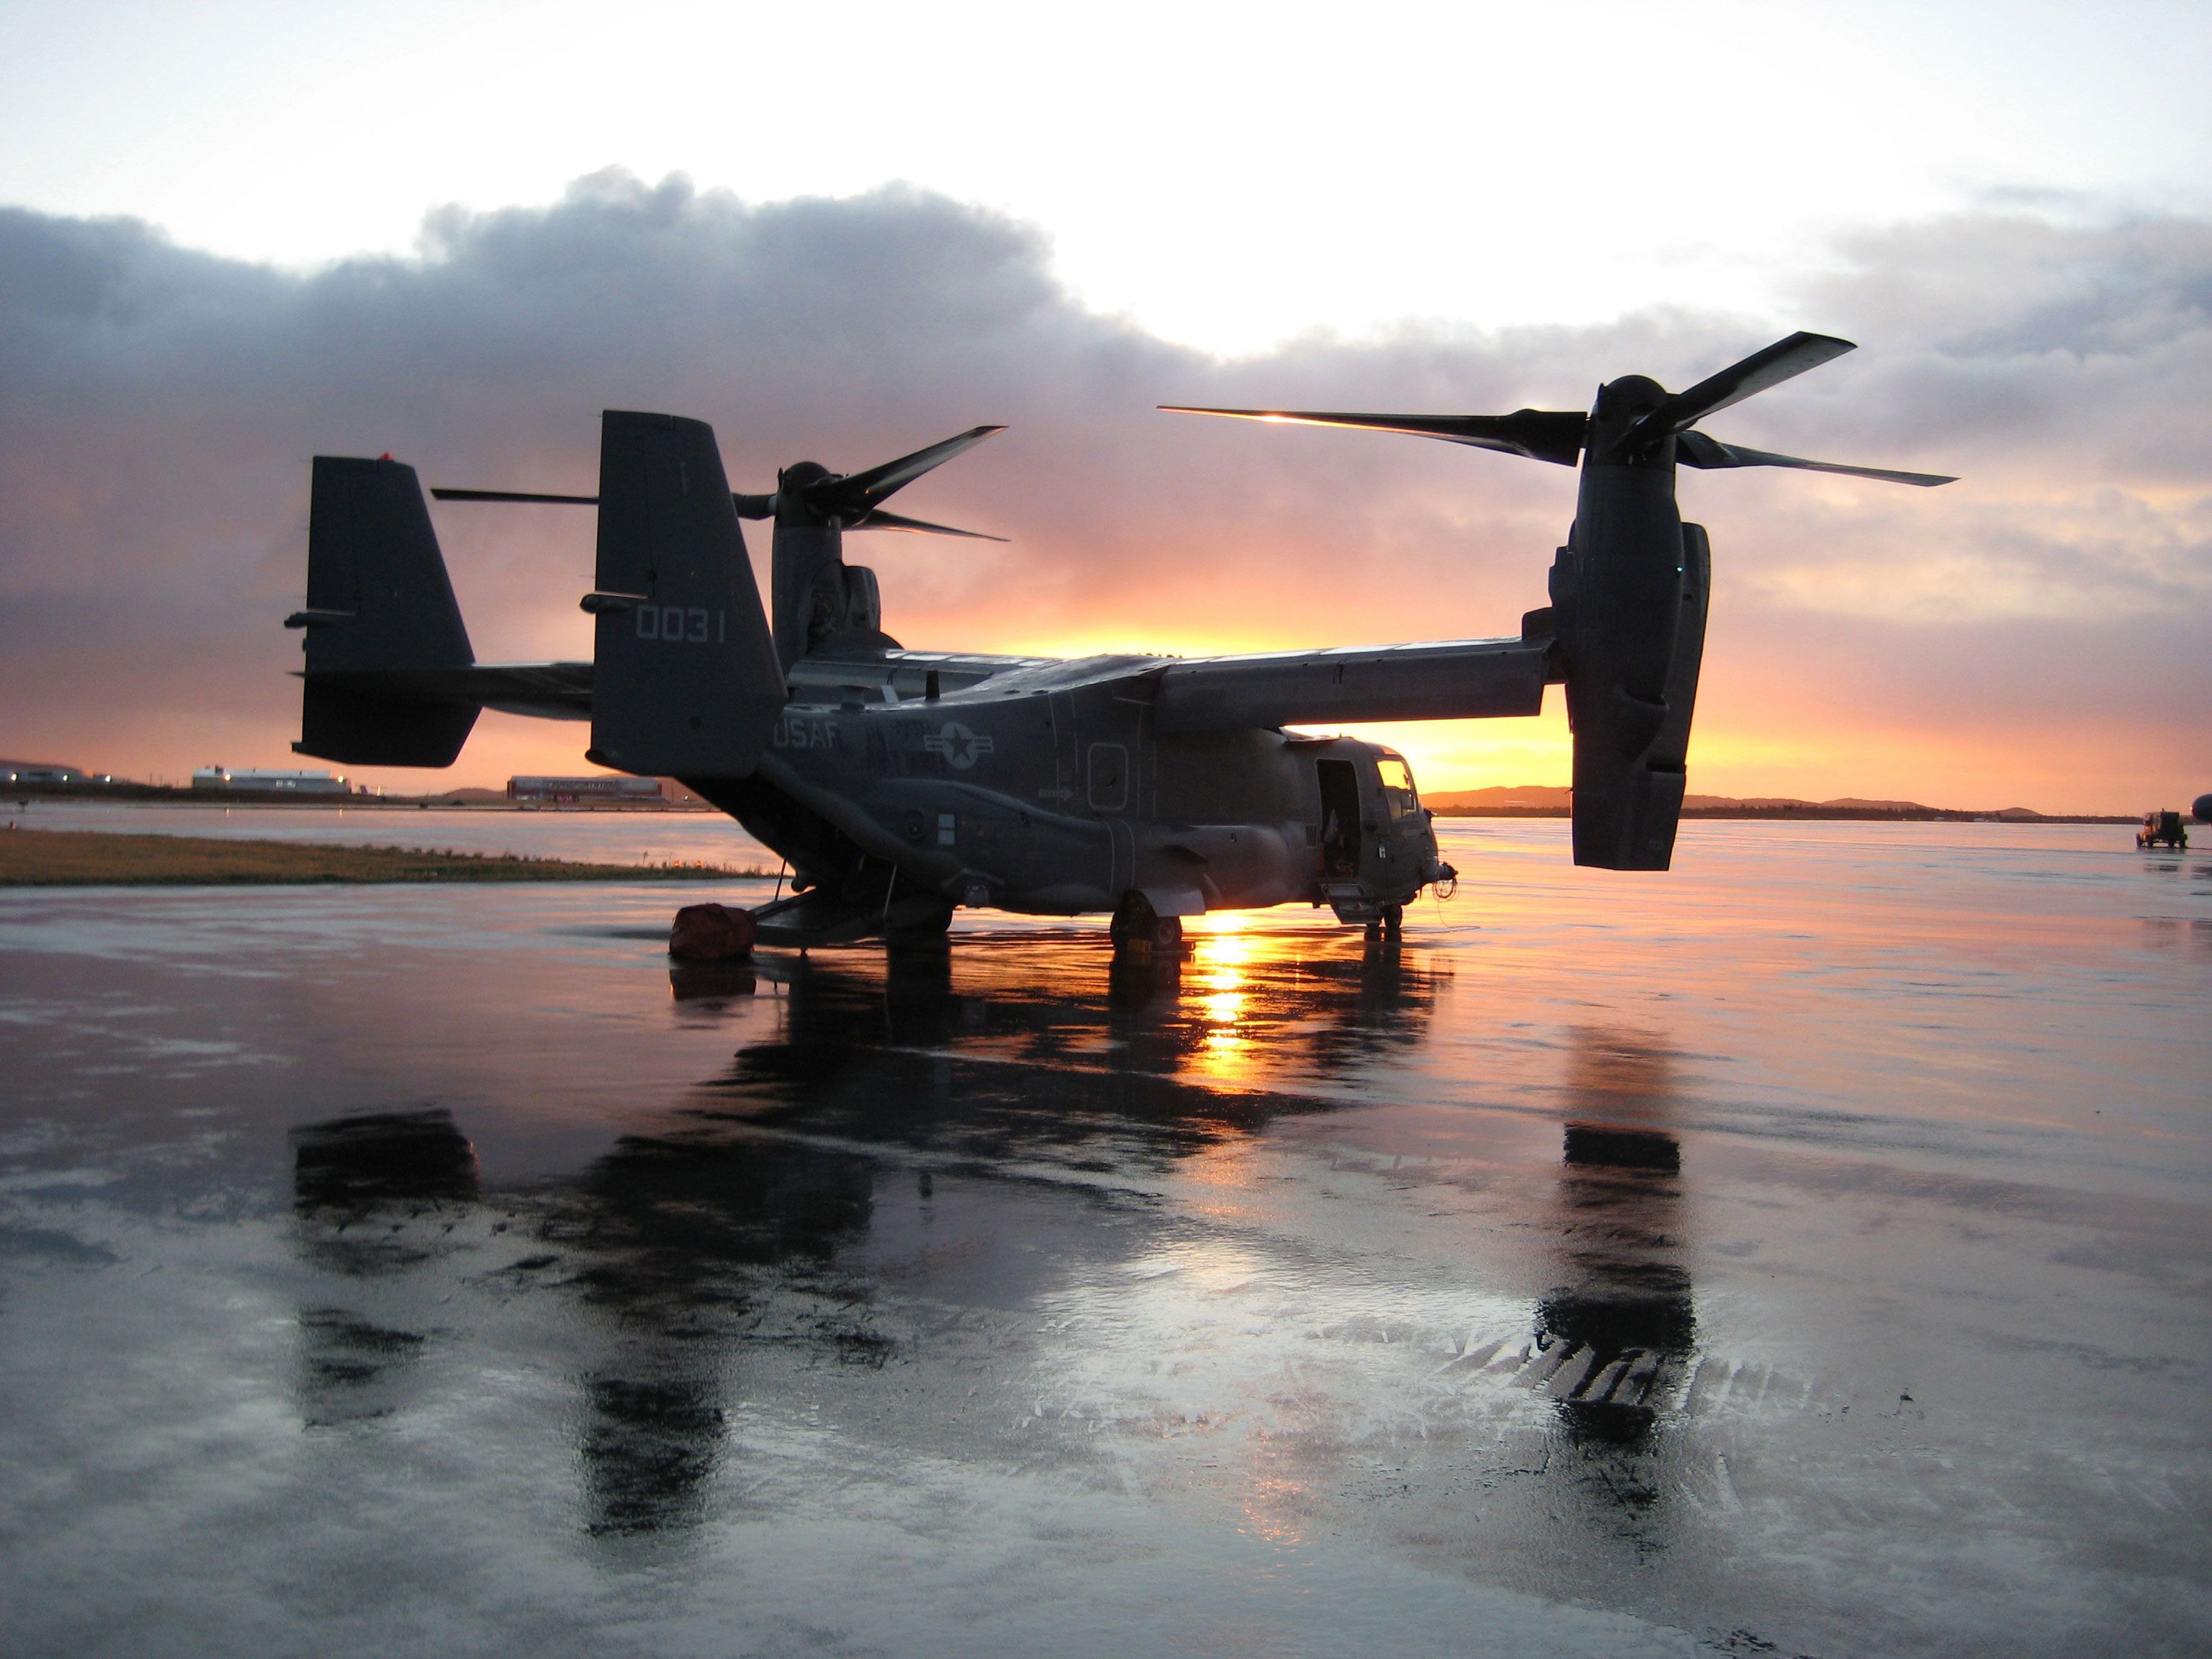 USAF CV 22 Osprey Picture. Aircraft, Osprey Helicopter, Military Aircraft